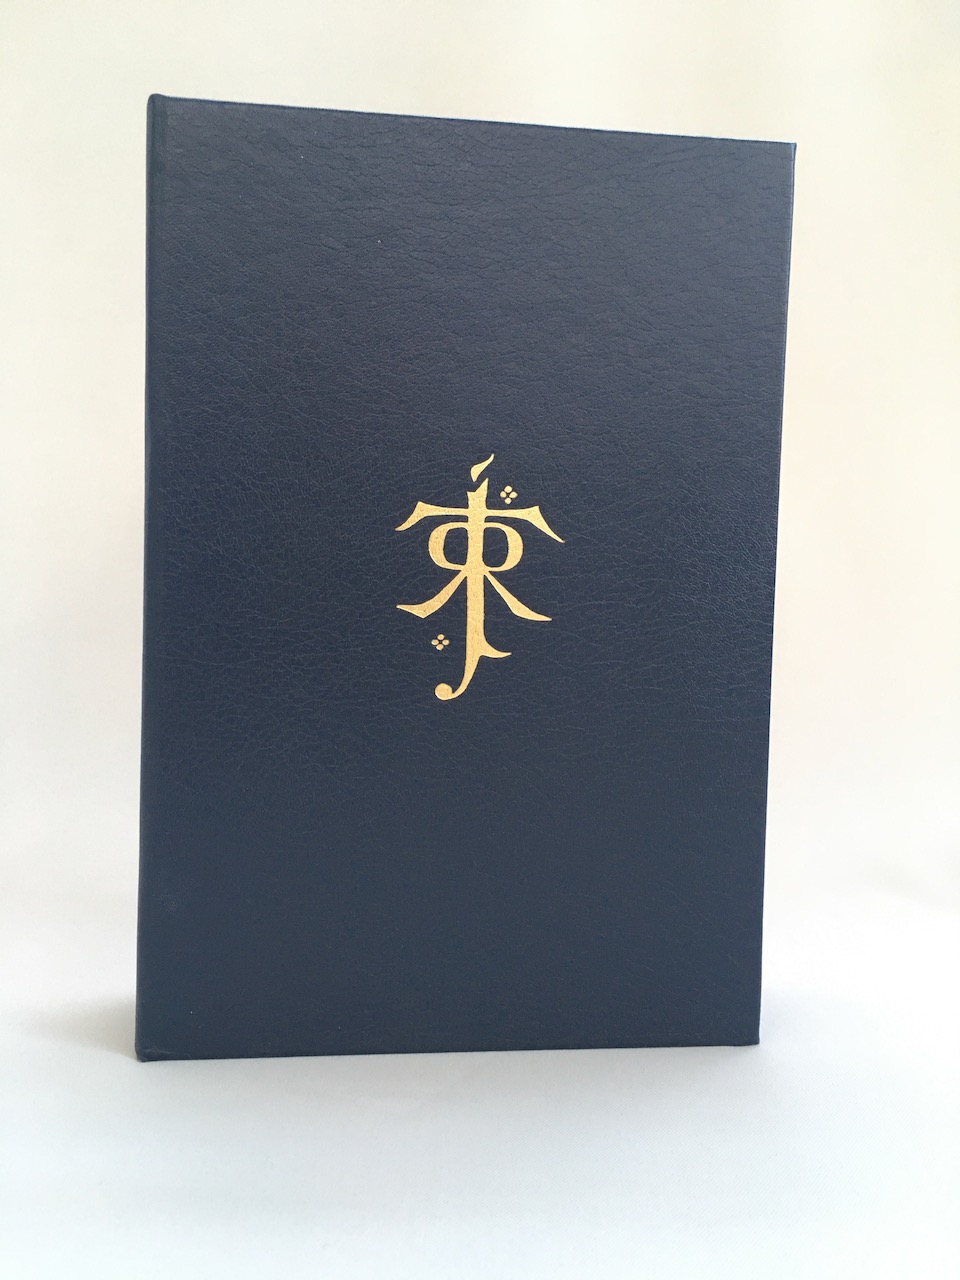 
The Children of Hurin Leather Signed Limited Edition - Super Deluxe Edition 3